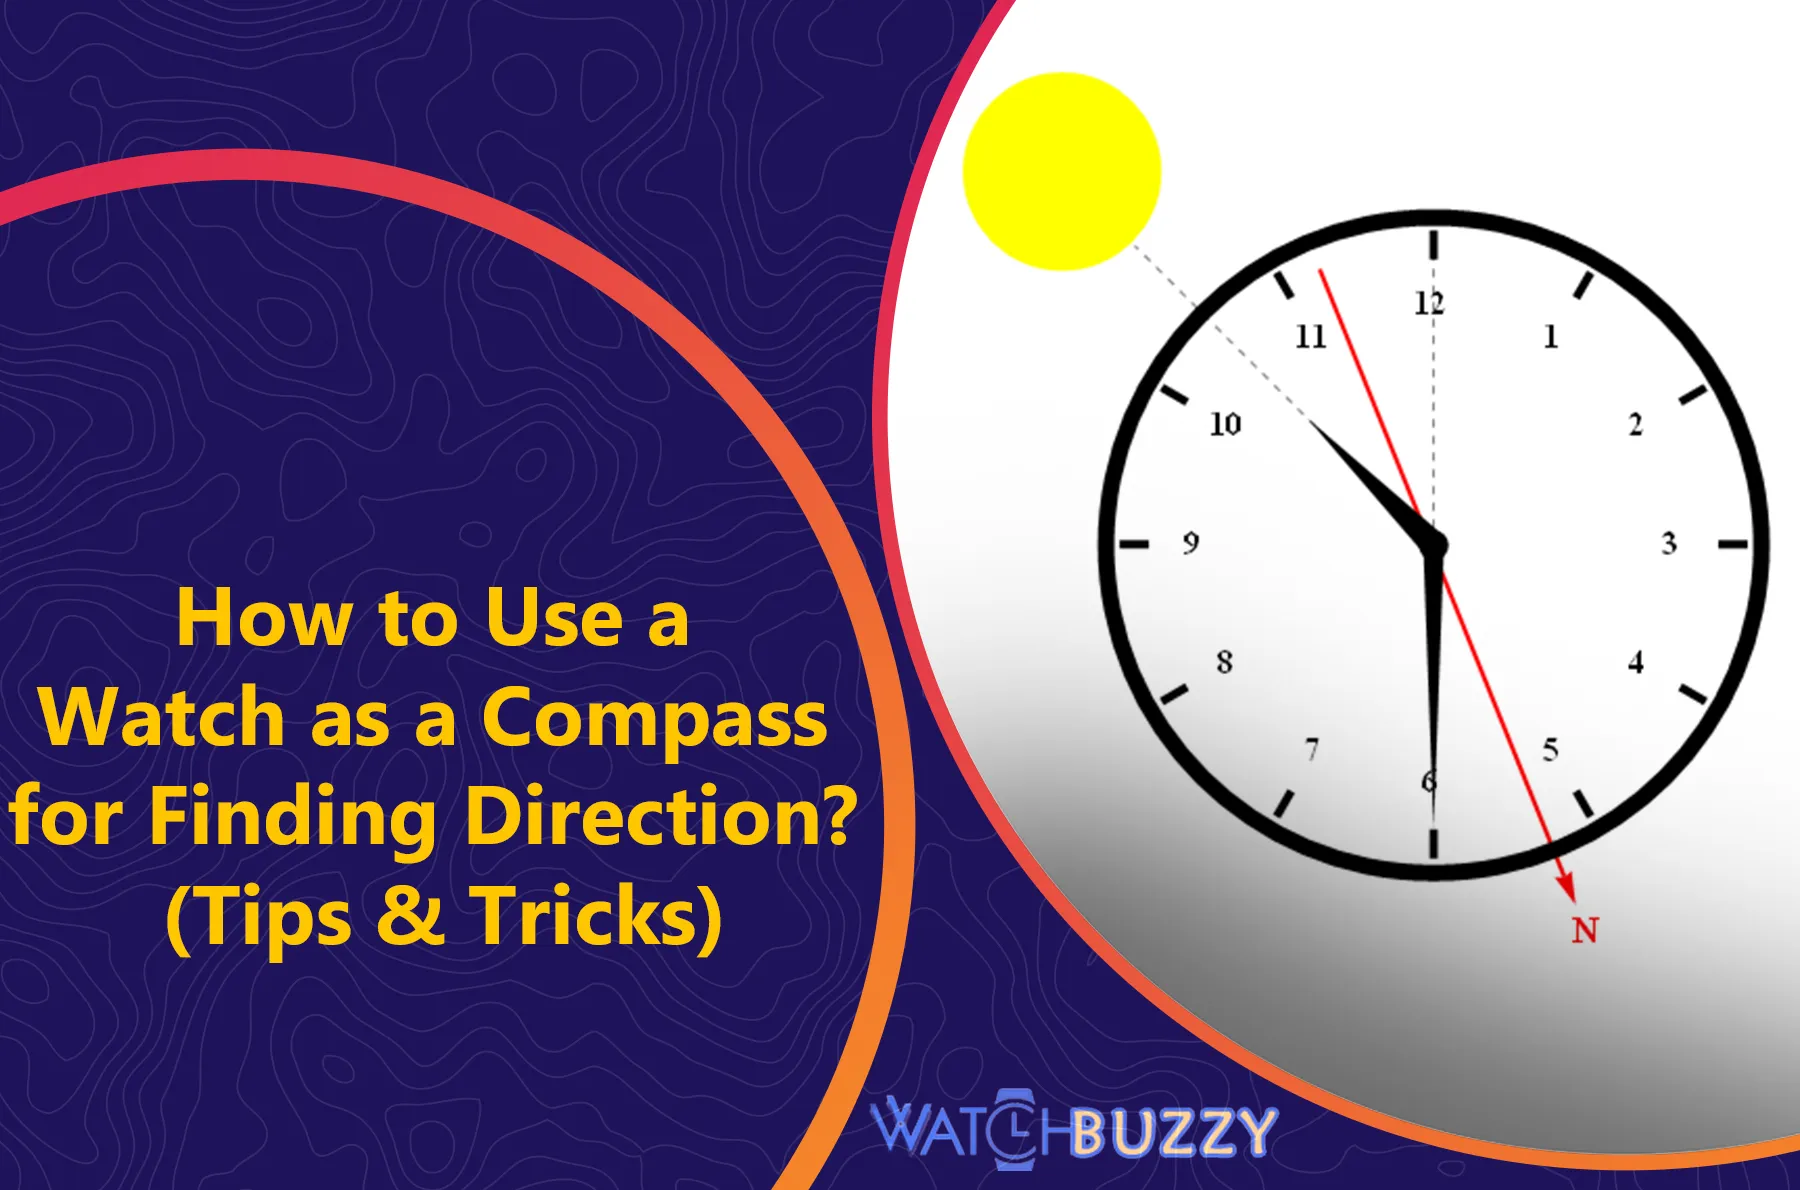 How to Use a Watch as a Compass for Finding Direction? (Tips & Tricks)